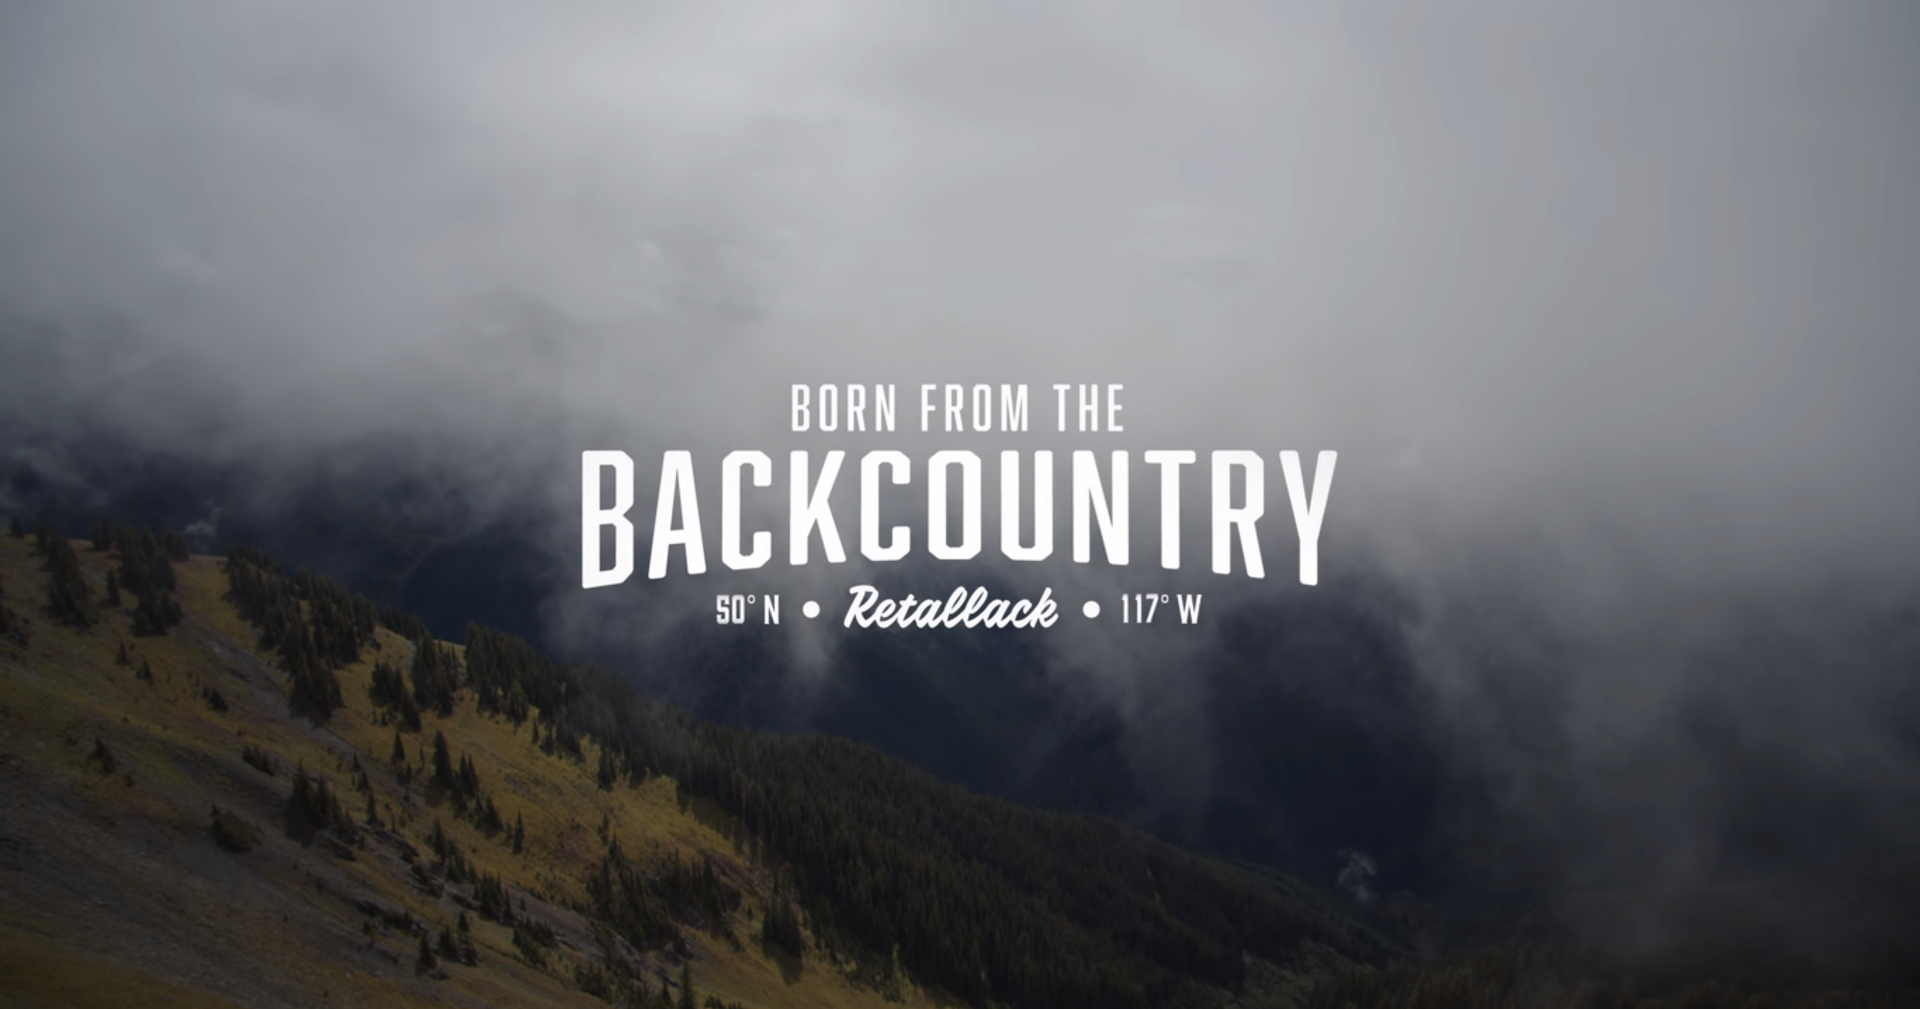 Born from the Backcountry